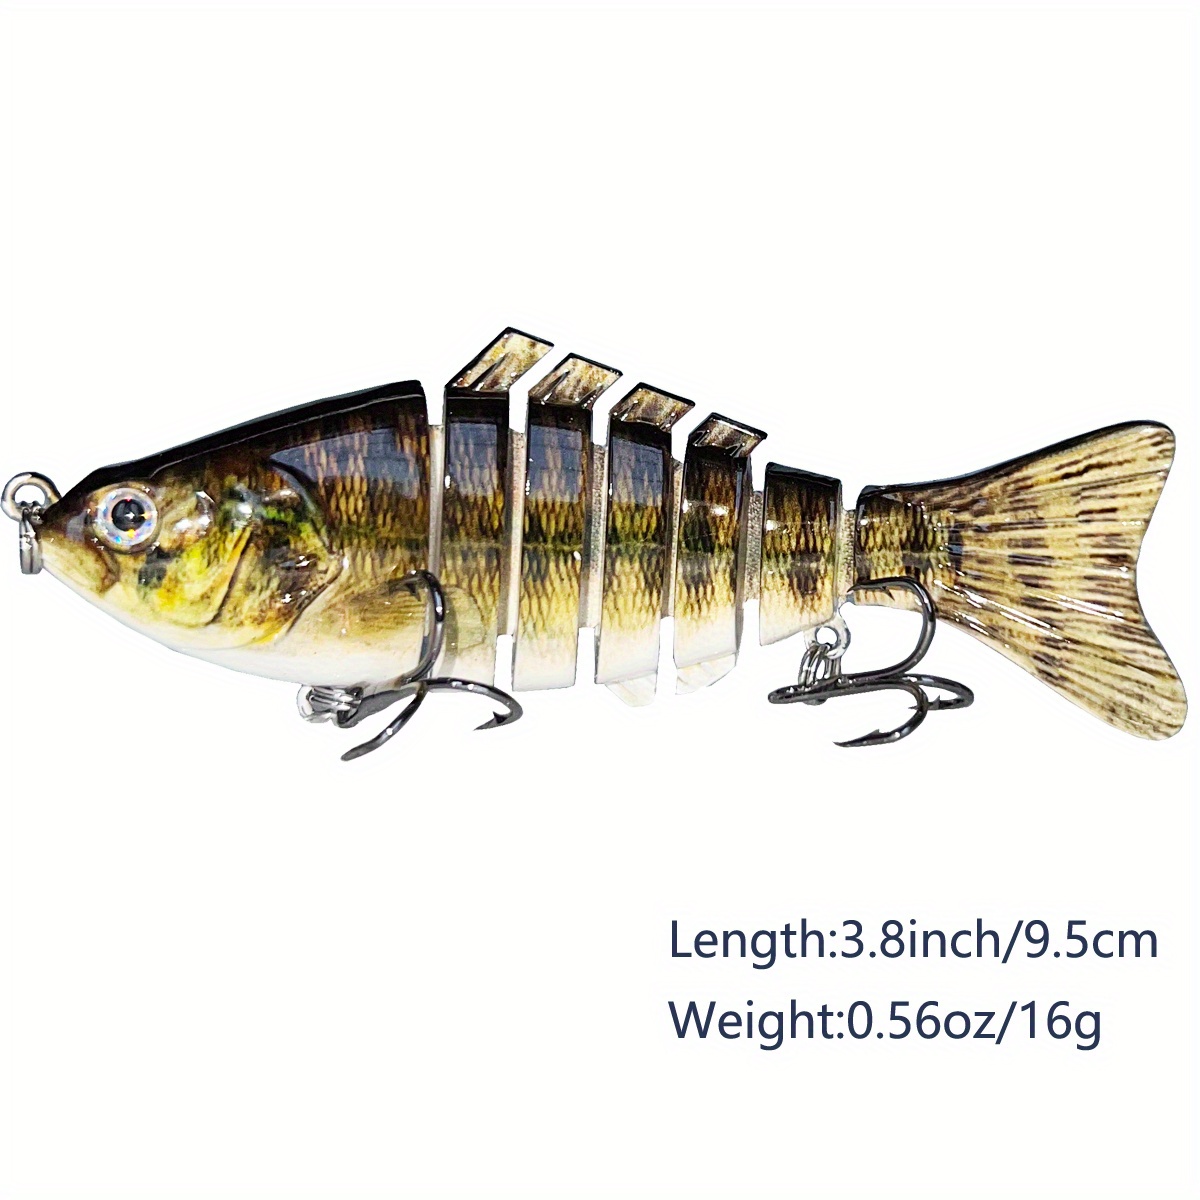 Silver Scaled FRY Multi Jointed Fishing Lure Swimbait perch pike